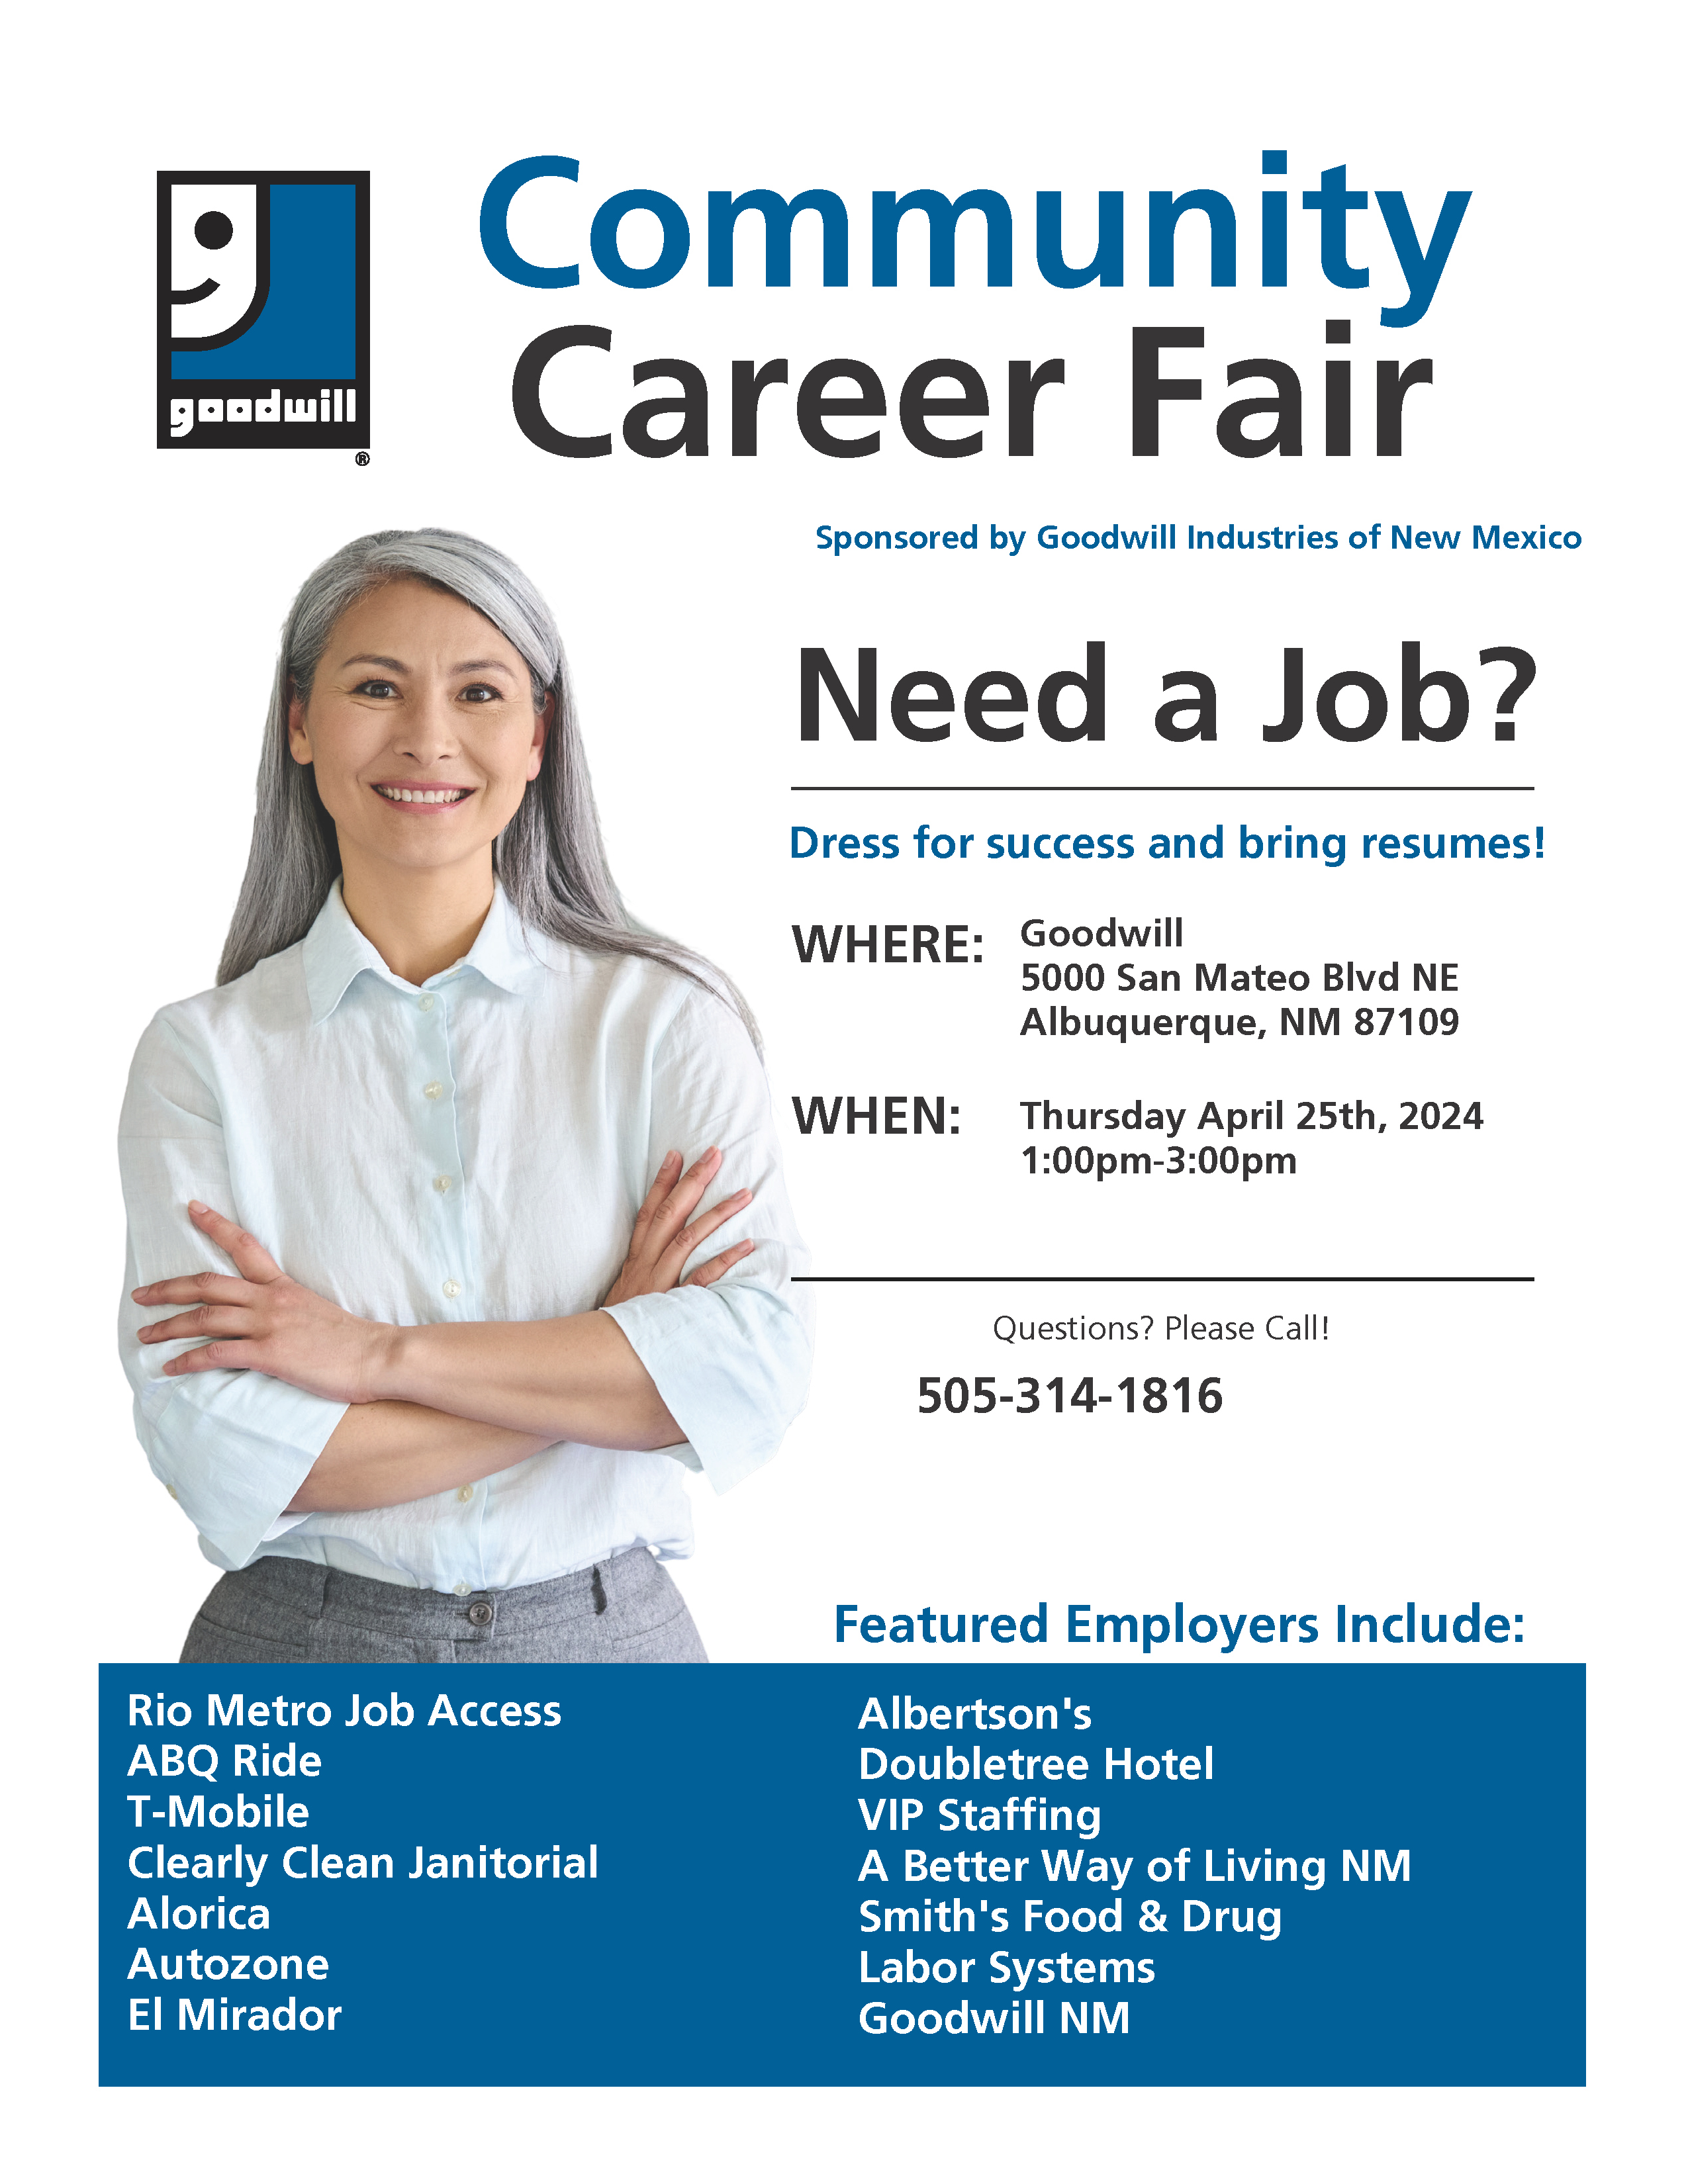 Community Career Fair Goodwill Industries of New Mexico